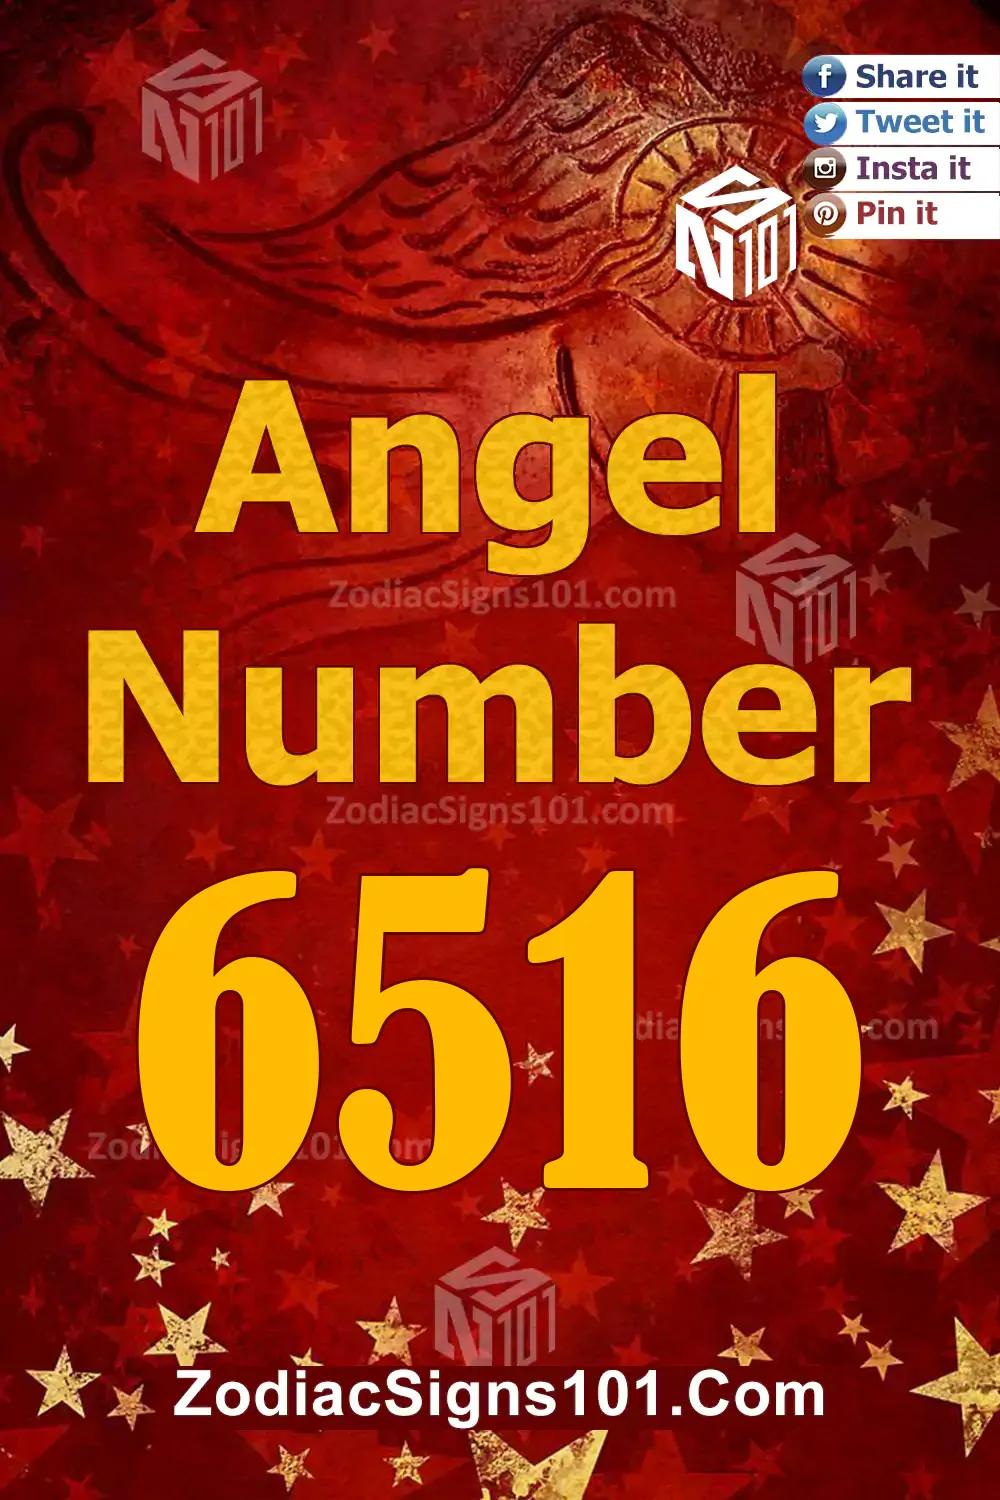 6516 Angel Number Meaning